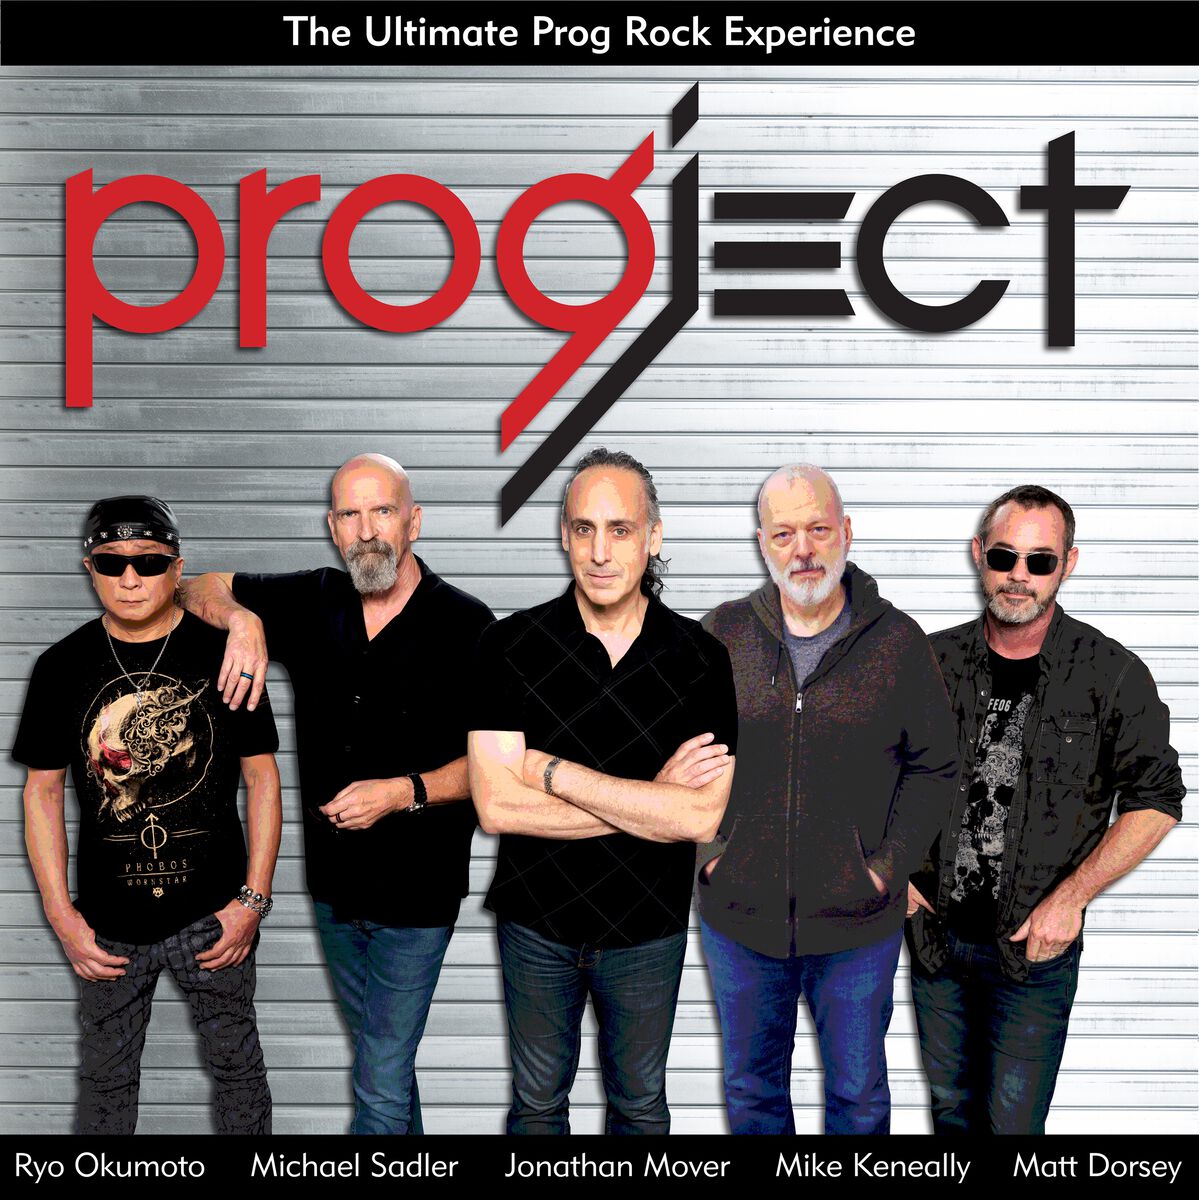 Mike Keneally completes ProgJect!